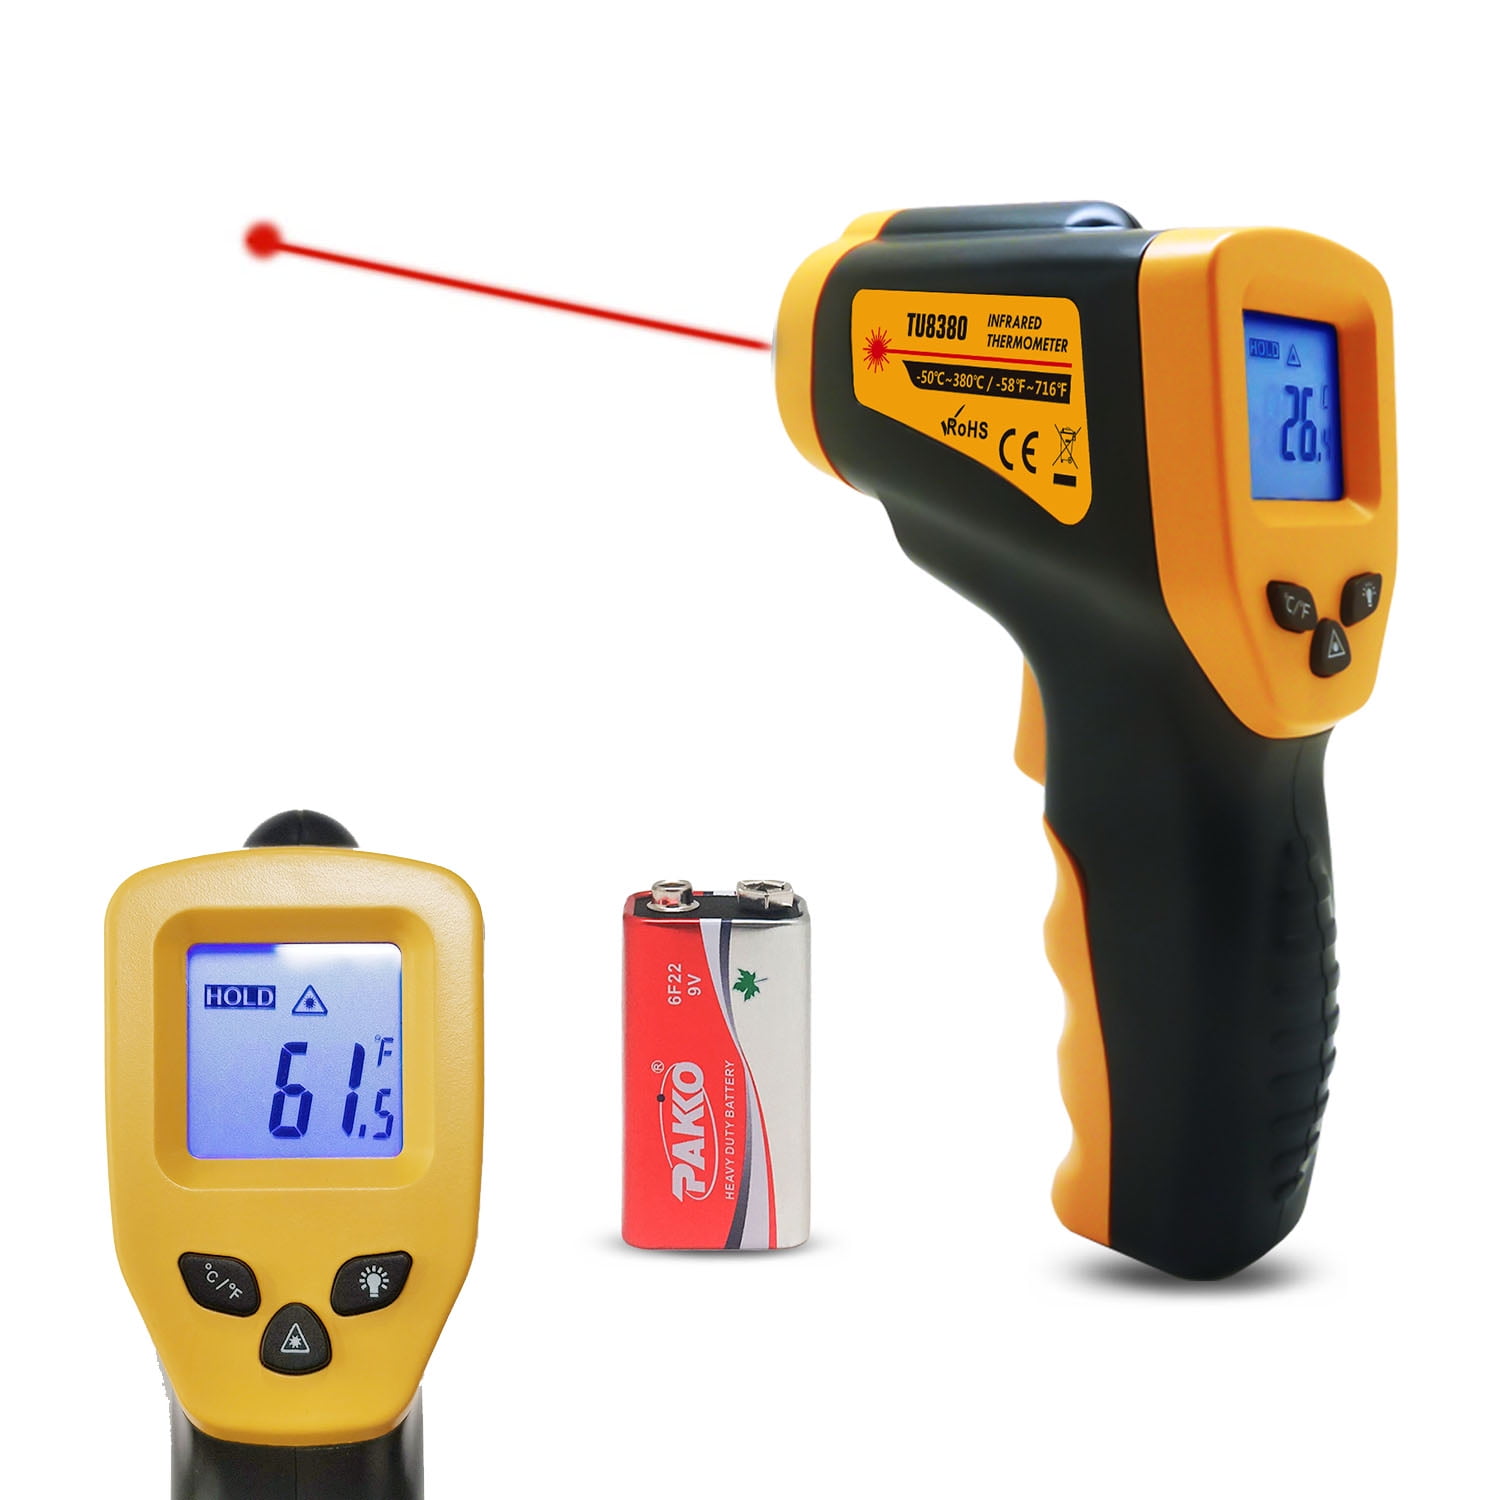 Etekcity Lasergrip 774 Non-contact Digital Laser Infrared Thermometer